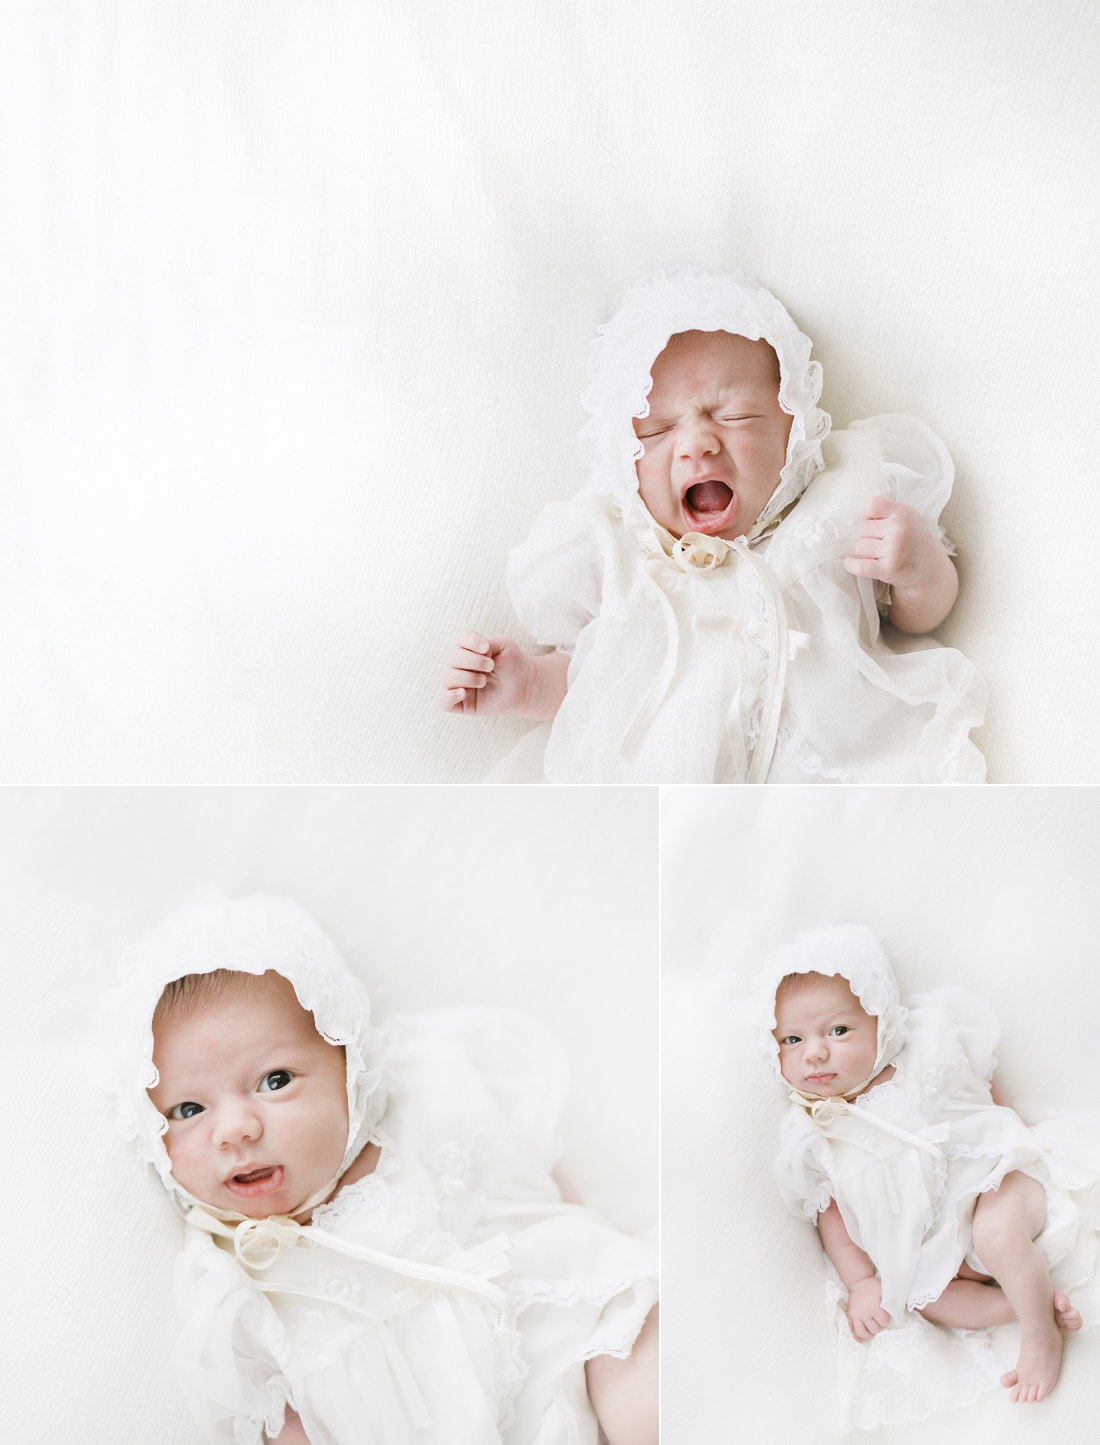 Newborn photos of baby yawning and looking at camera in christening gown